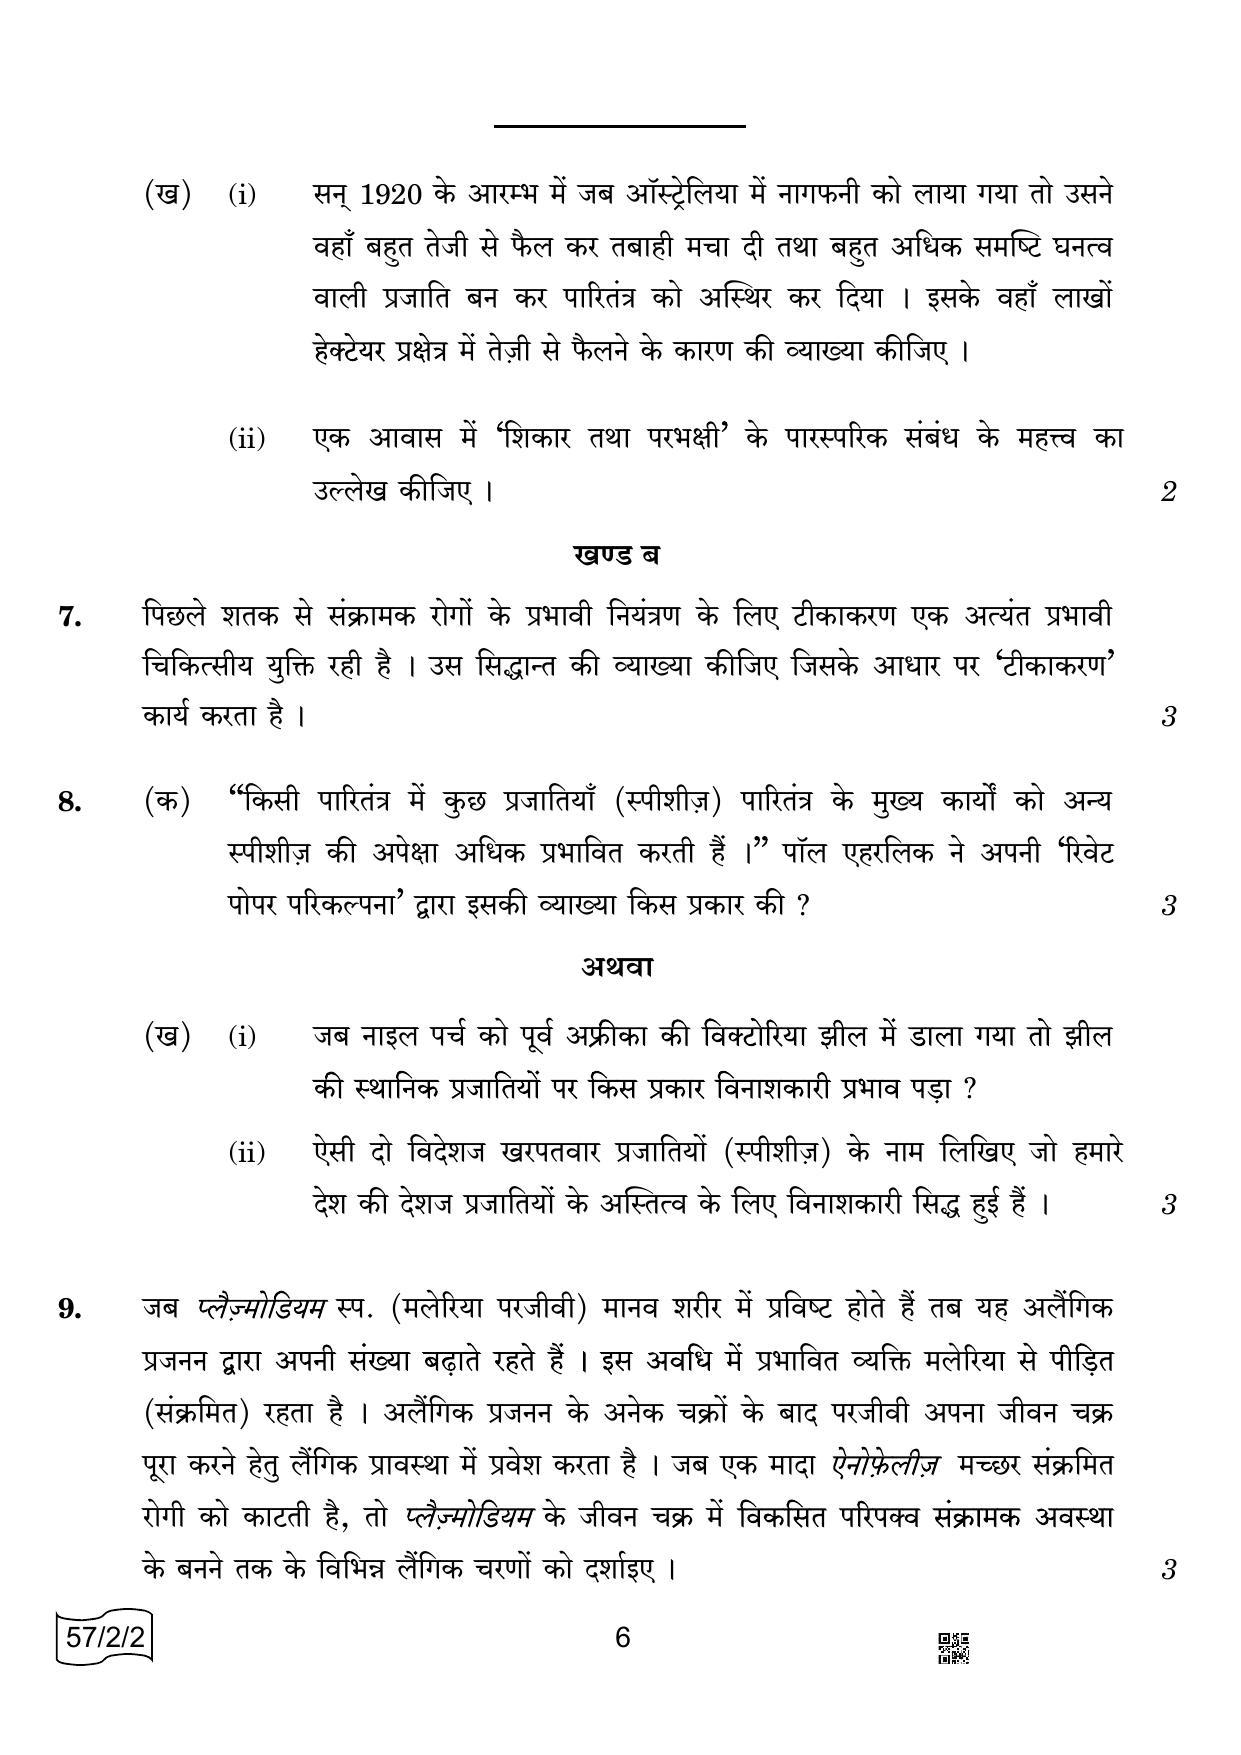 CBSE Class 12 57-2-2 Biology 2022 Question Paper - Page 6